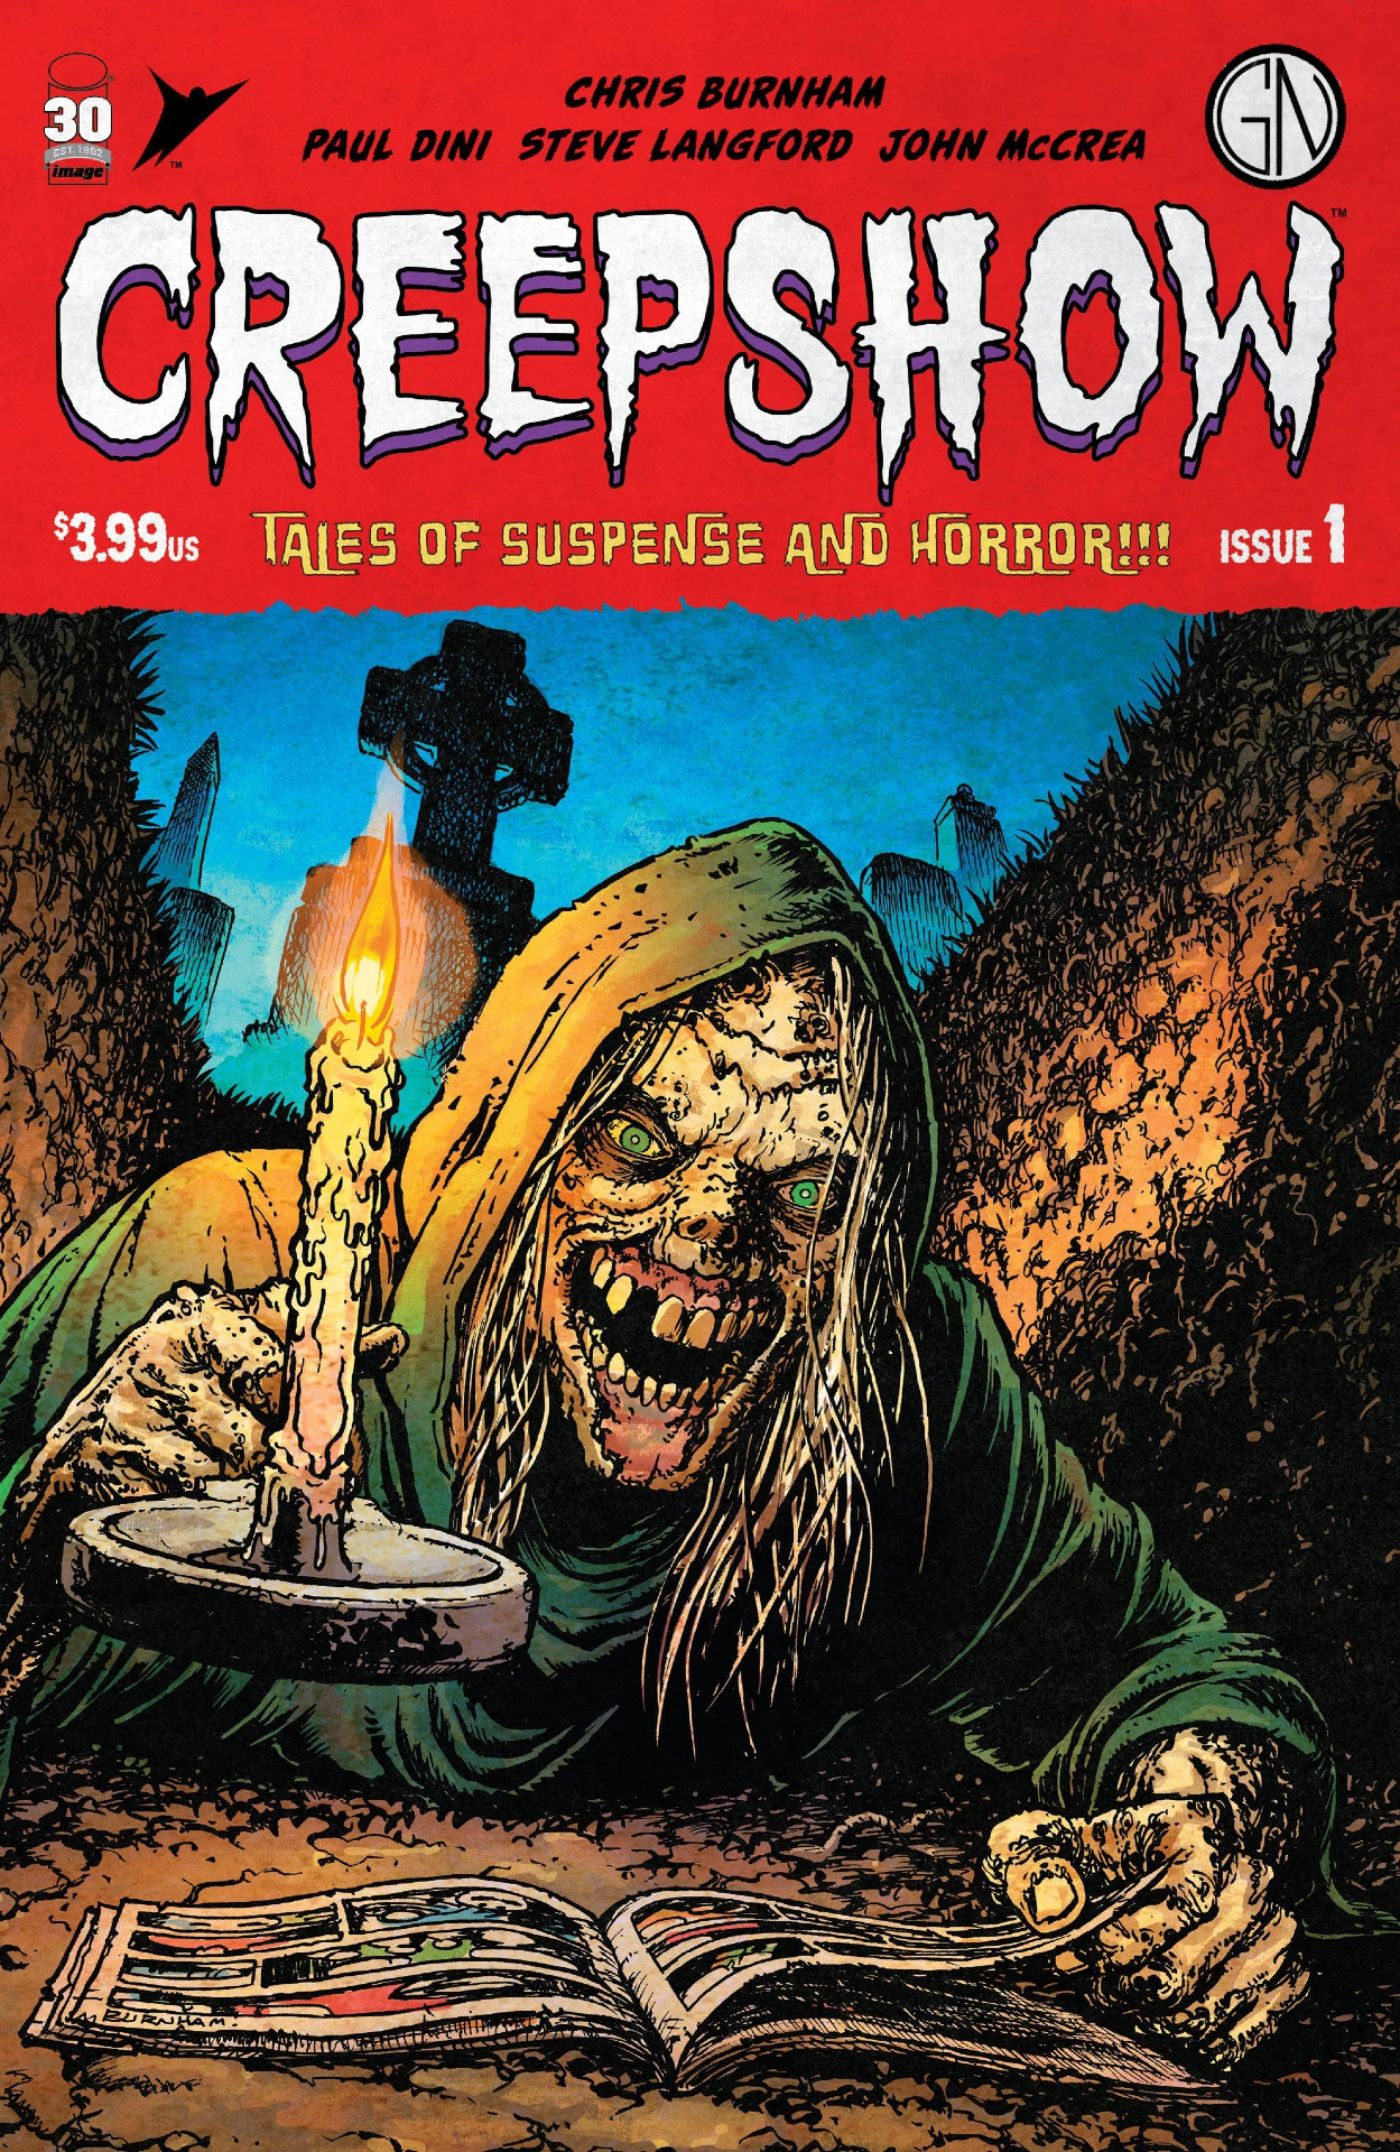 Creepshow’s New Anthology Series Is the Truest Version of Its Premise